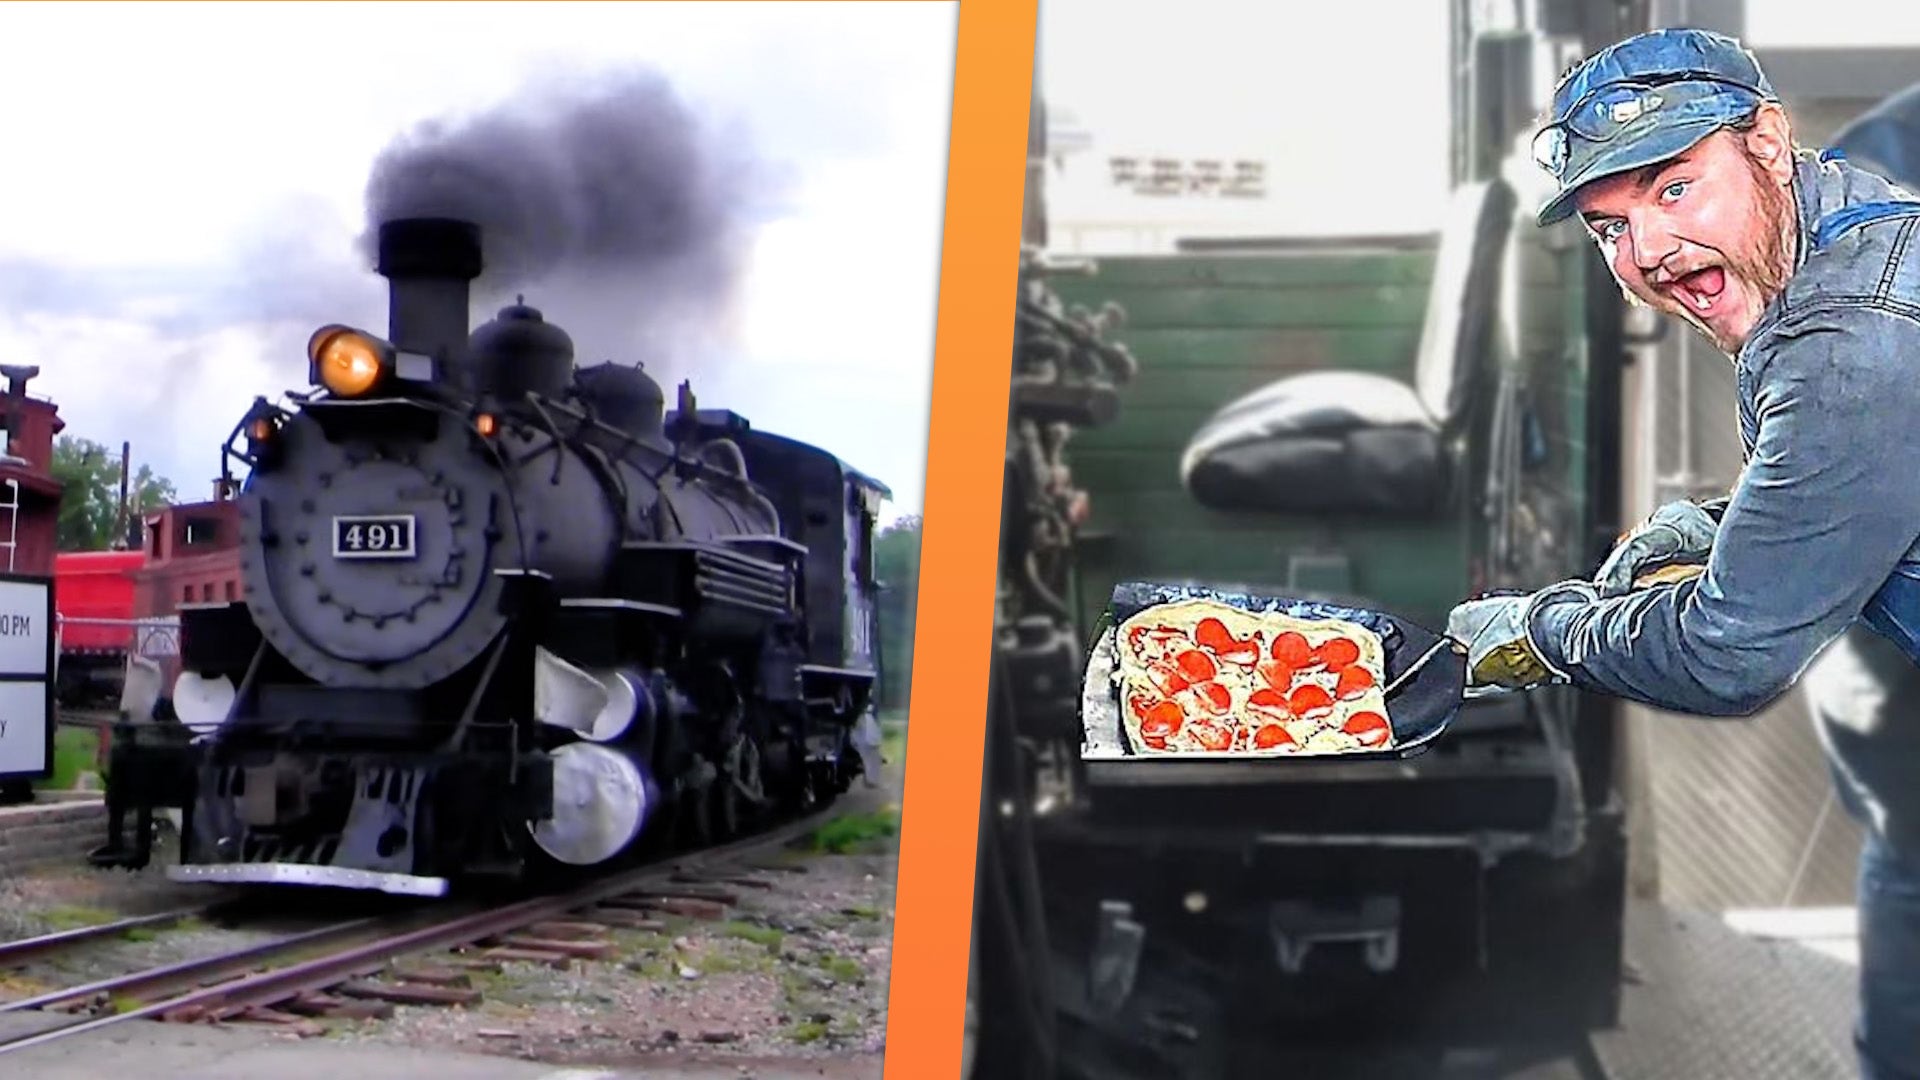 Baking Pizza in a 1928 Steam Locomotive Works Better Than You’d Expect